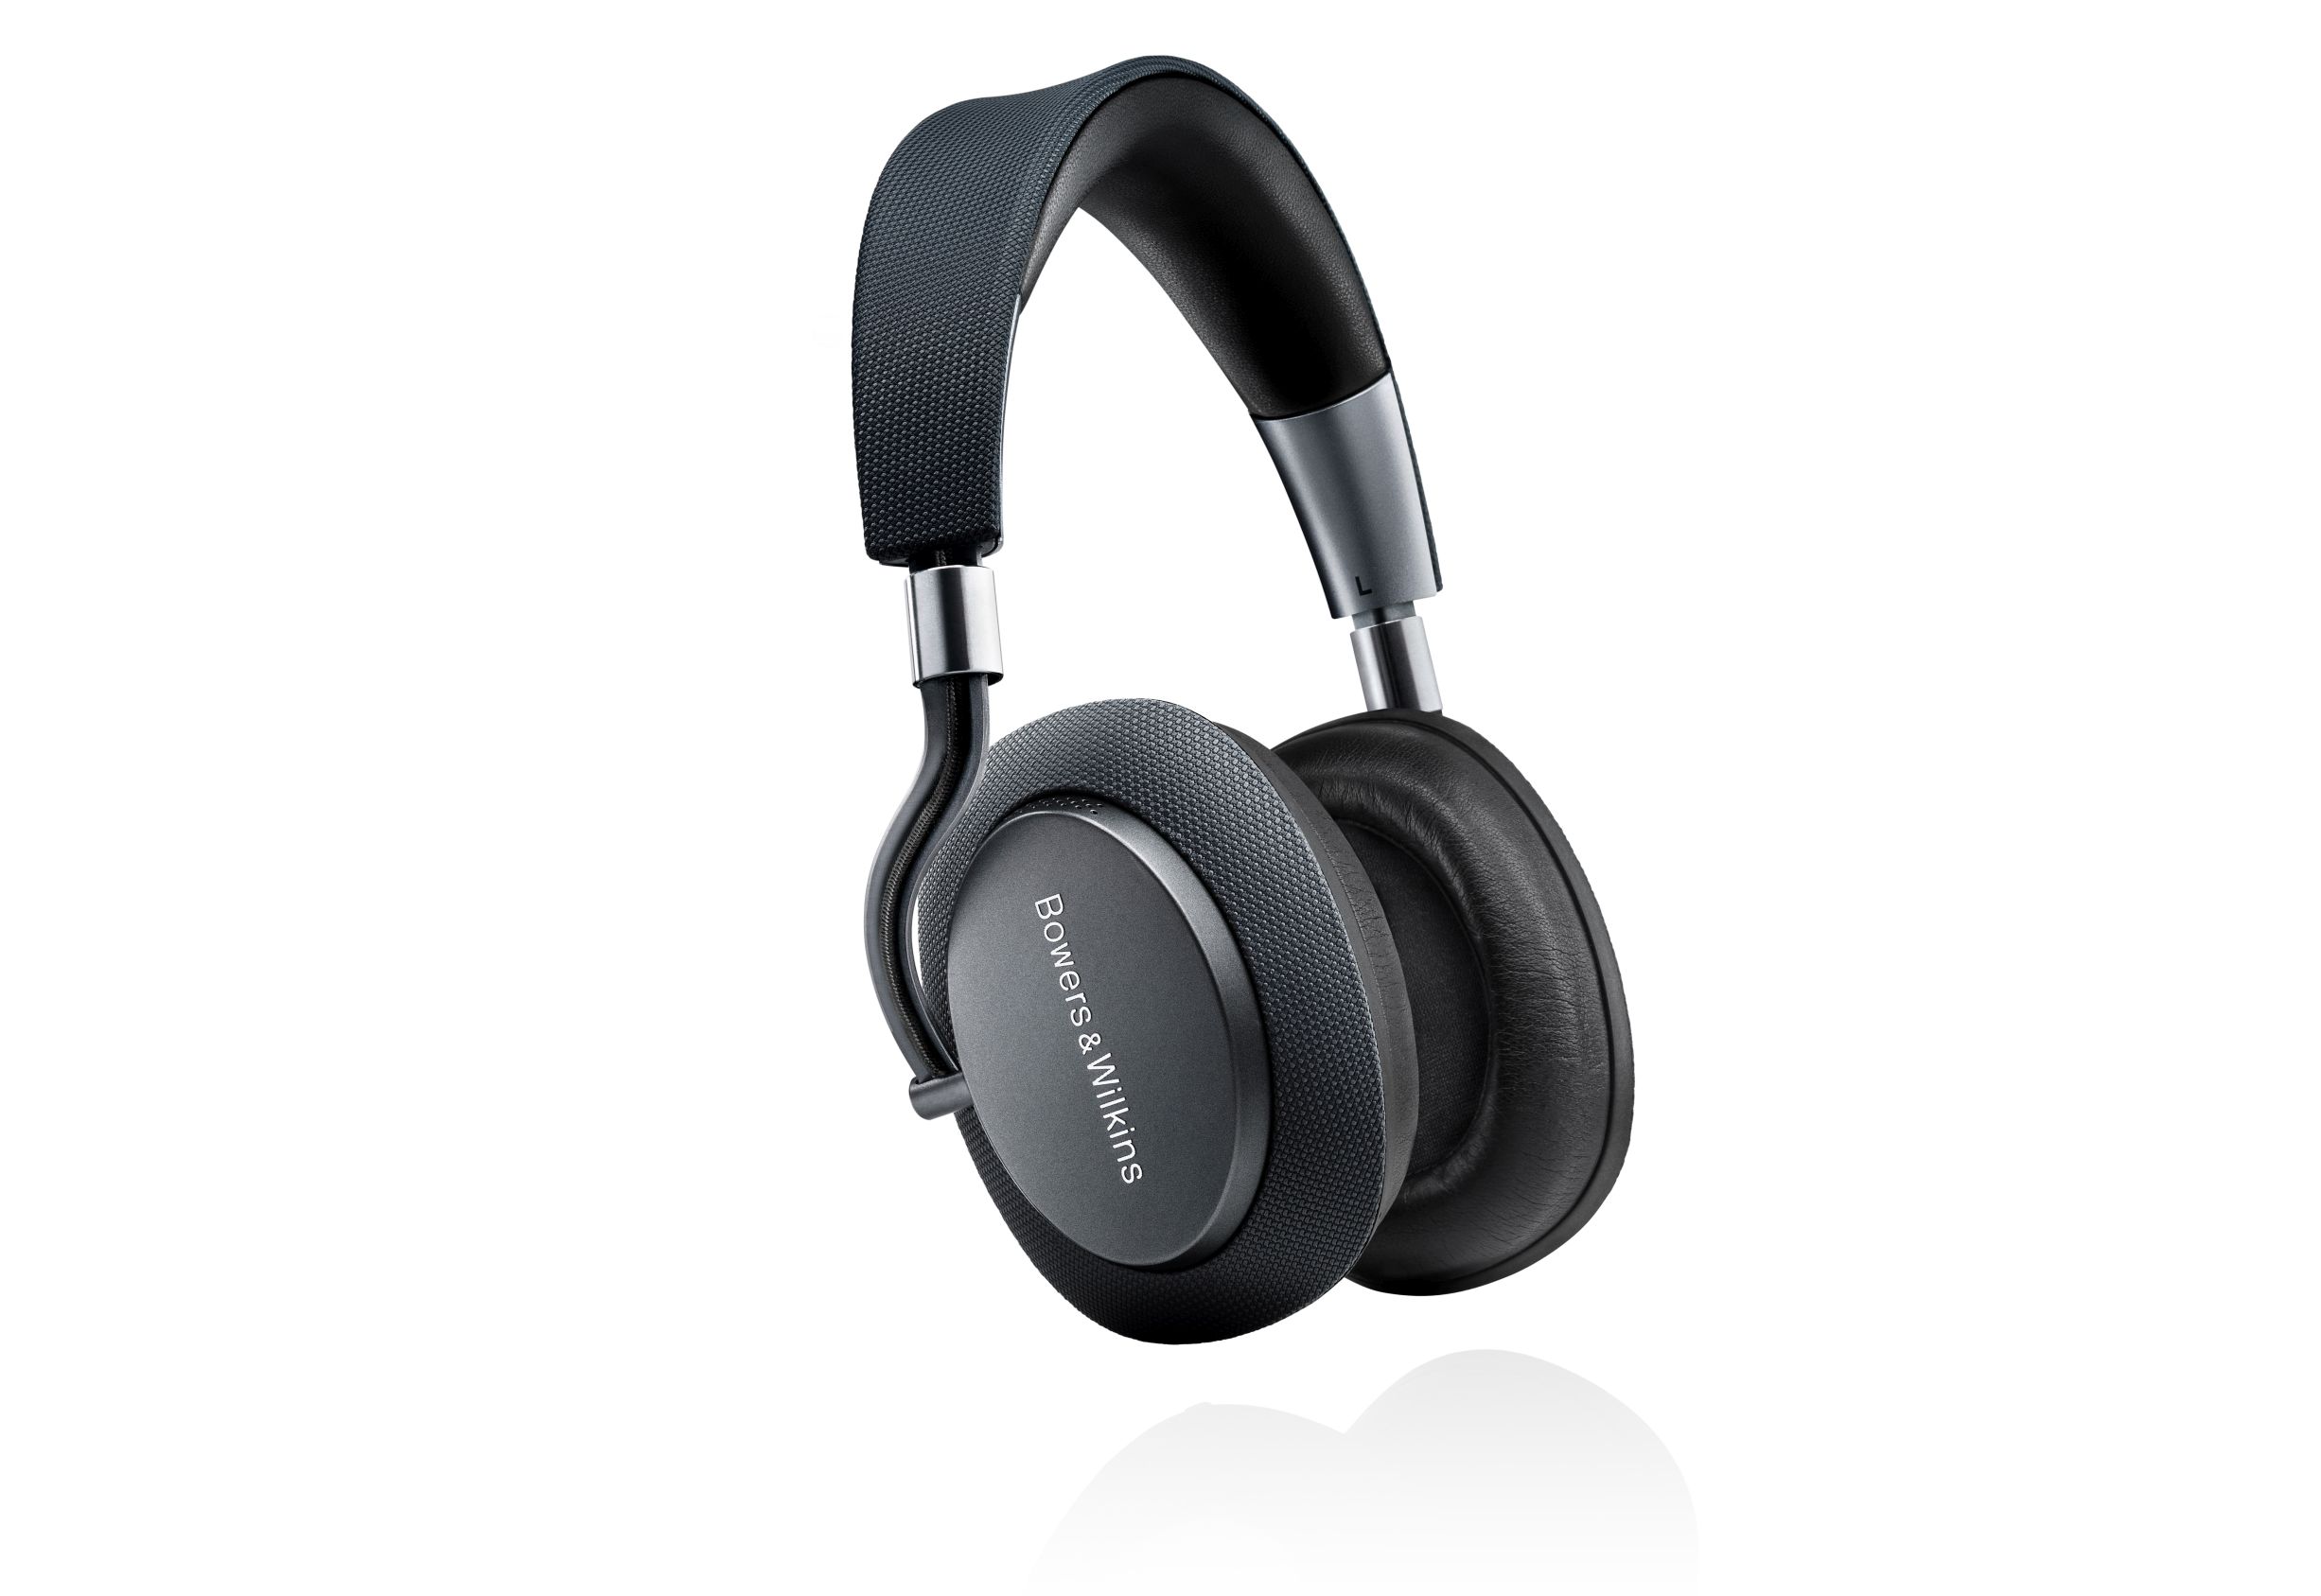 British speaker brand Bowers & Wilkins have unveiled their new PX noise-canceling headphones, a travel essential for any world wanderer. 